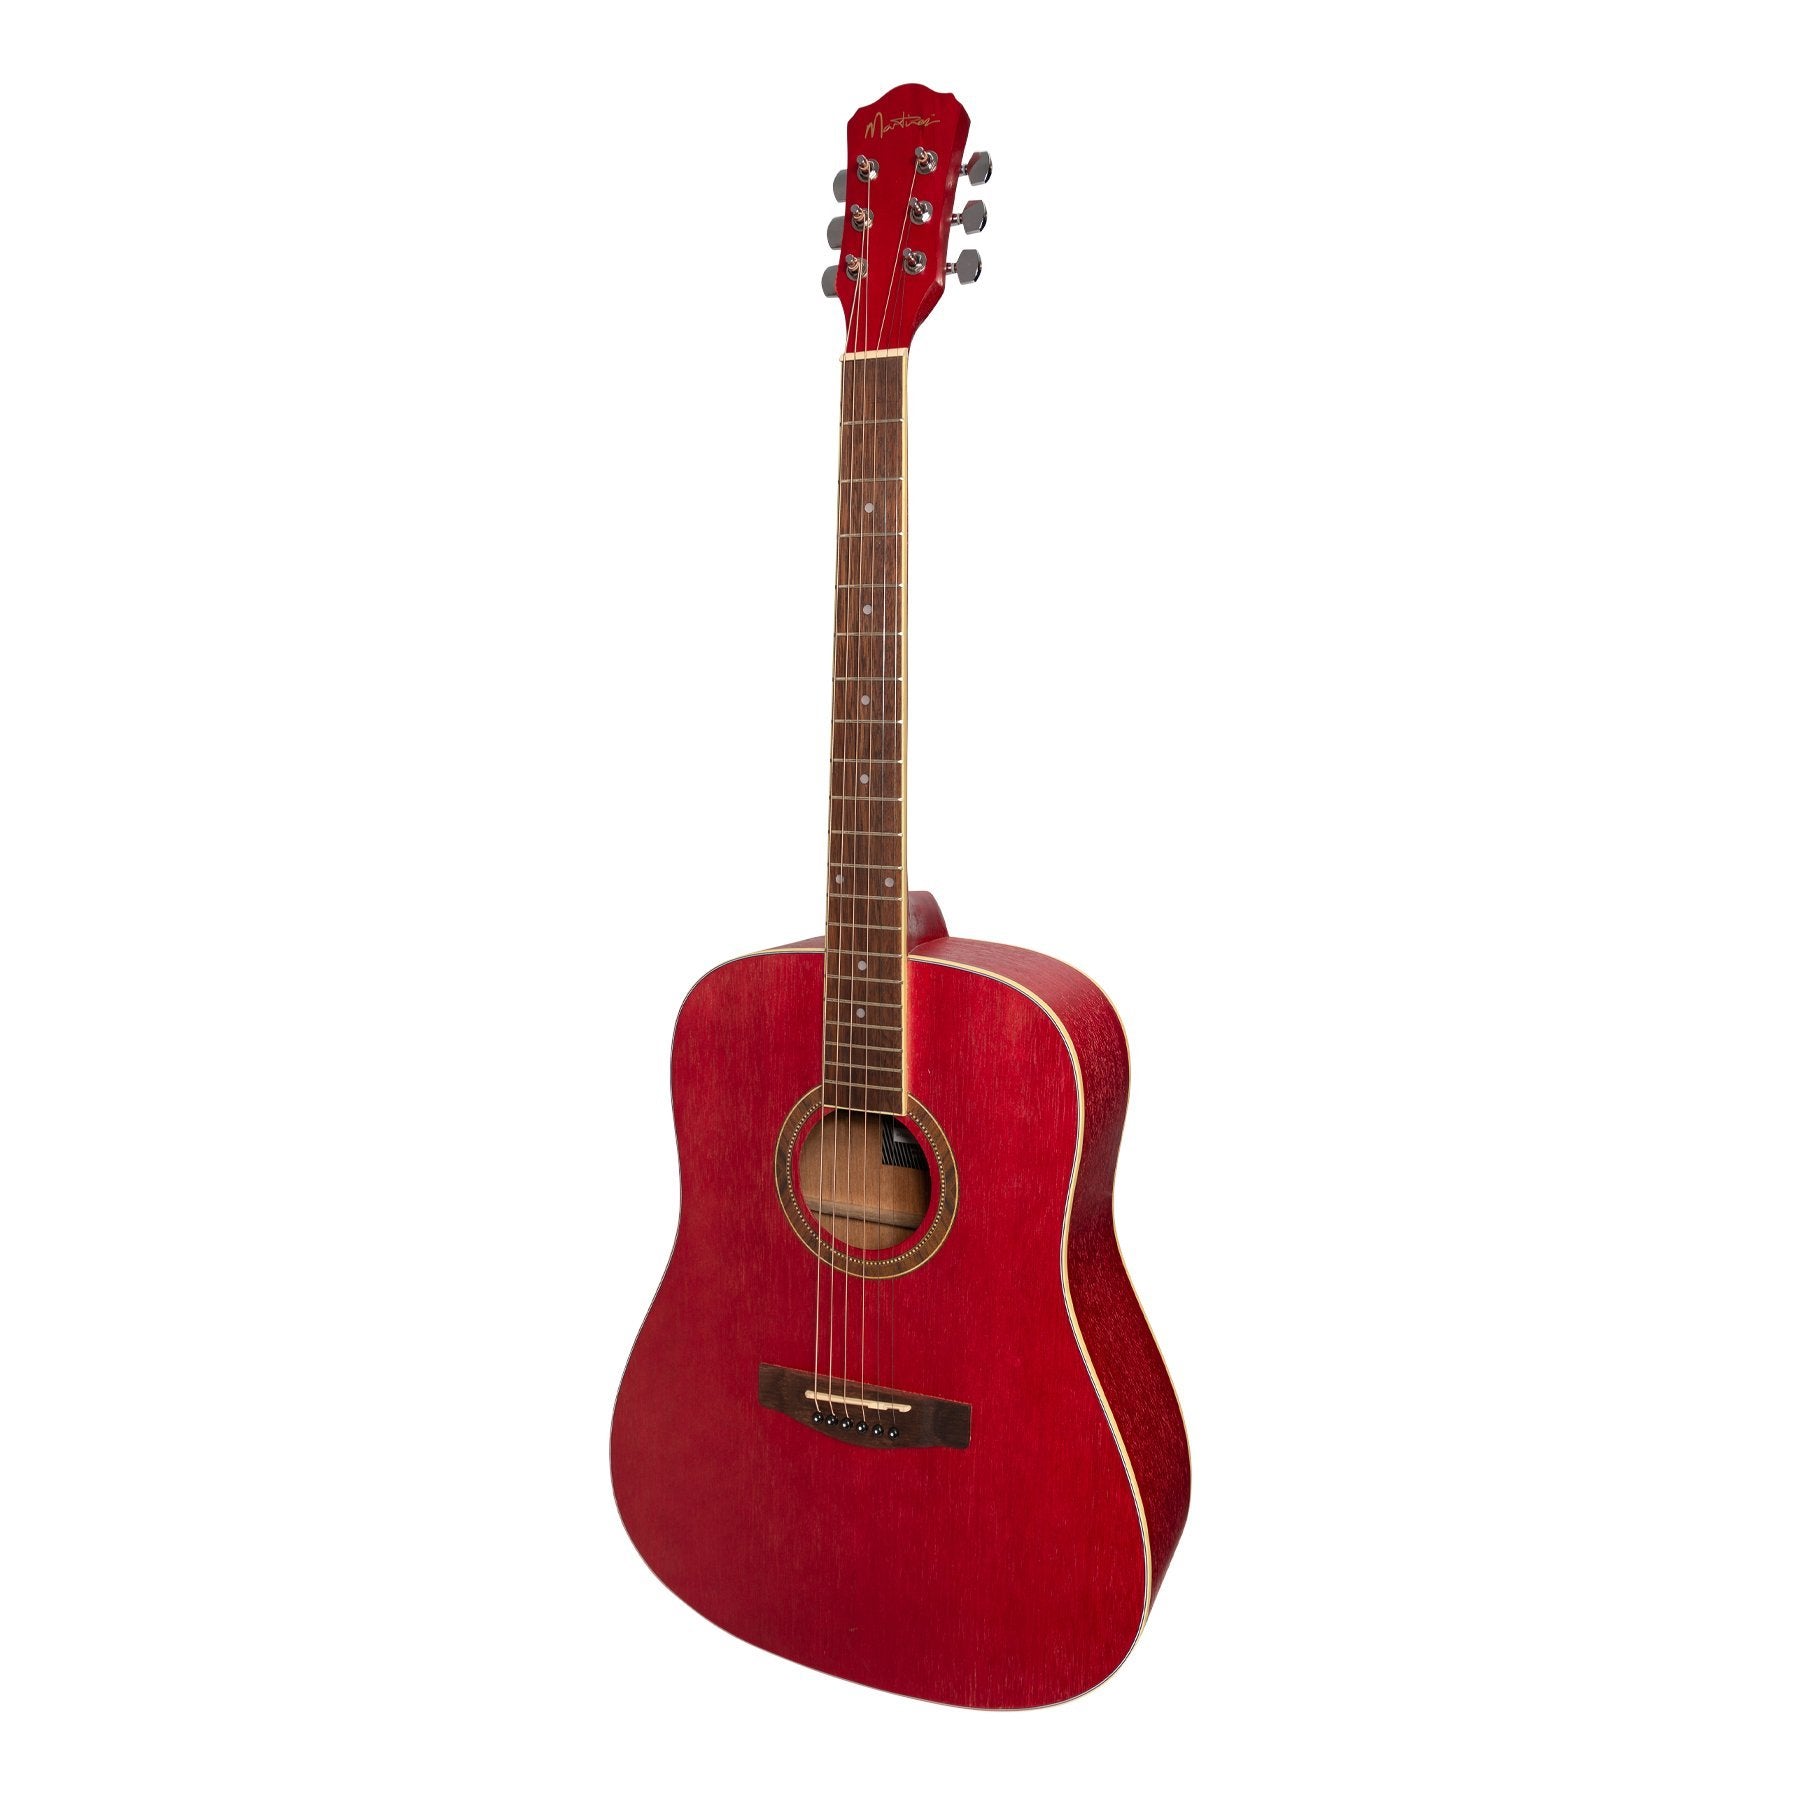 Martinez '41 Series' Dreadnought Acoustic Guitar (Strawberry Pink)-MD-41-PNK